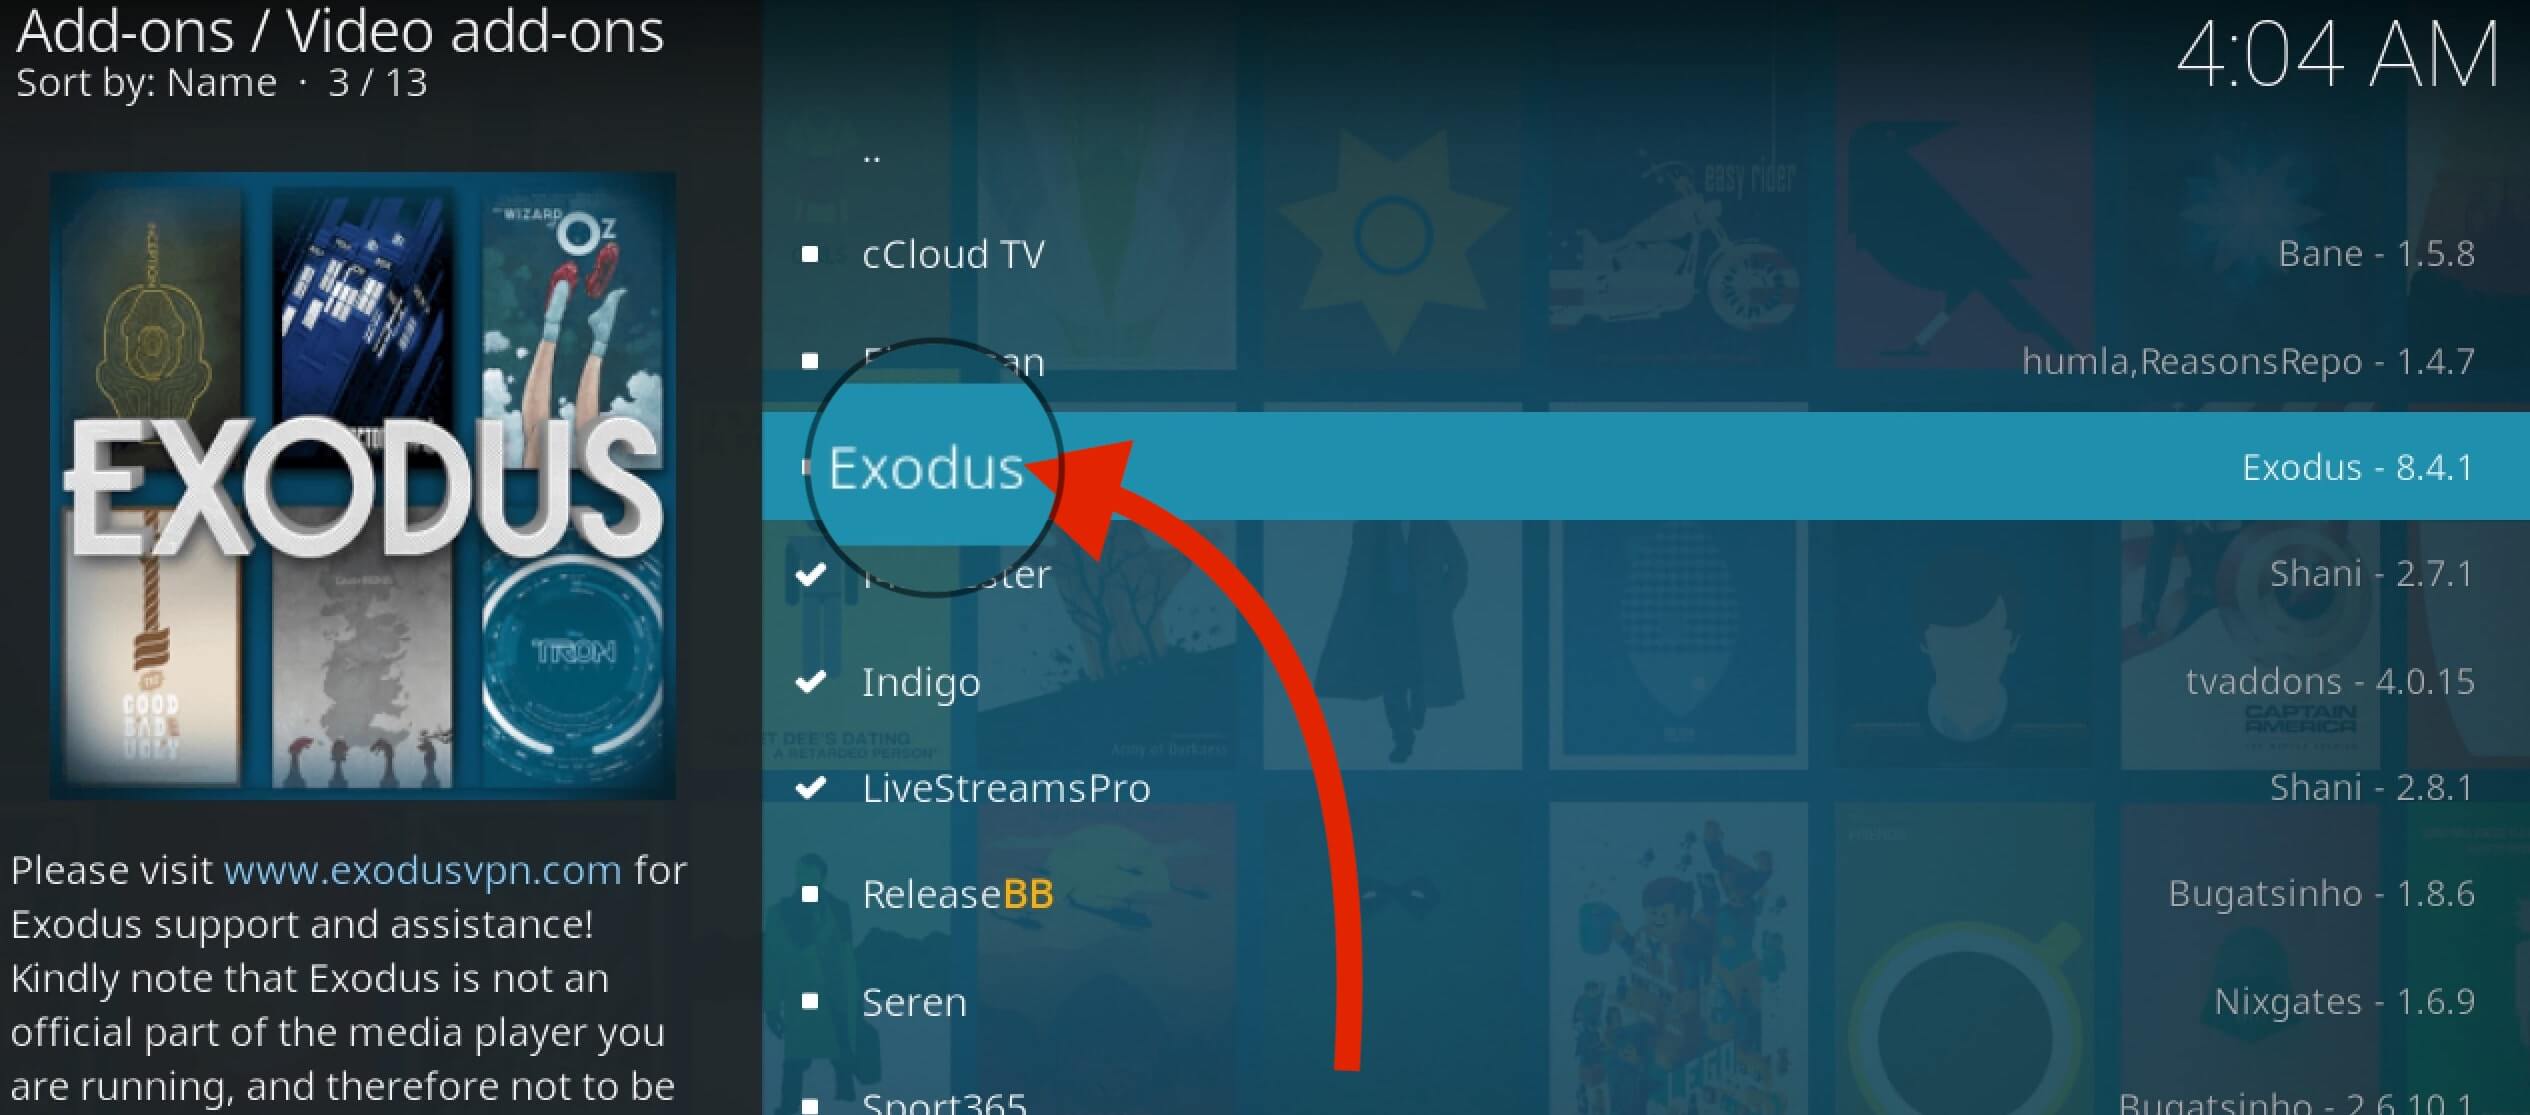 Select-Exodus-From-Video-Addons-List